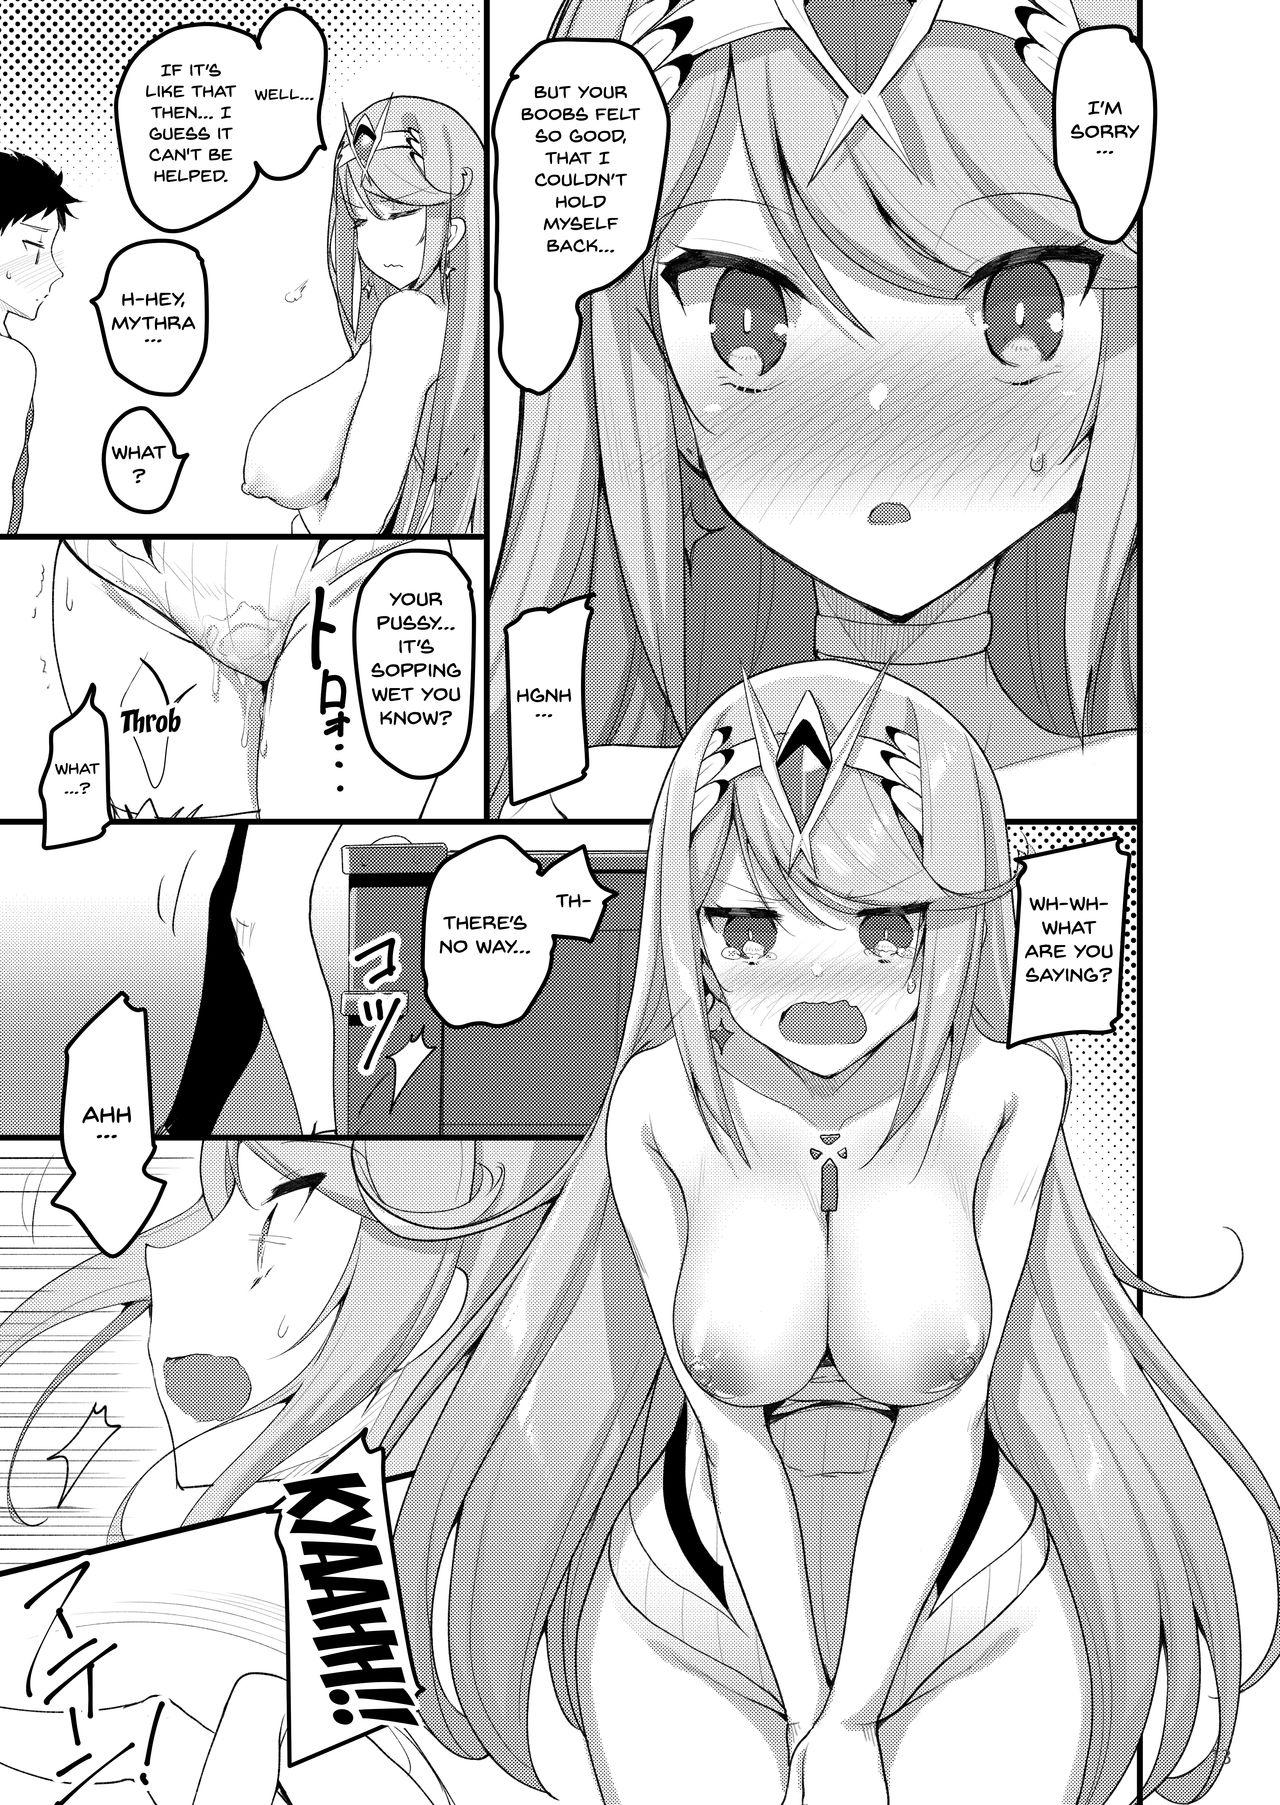 Squirt Superbia no Amai Yoru 2 | Superbia's Sweet Night 2 - Xenoblade chronicles 2 Public Fuck - Page 11